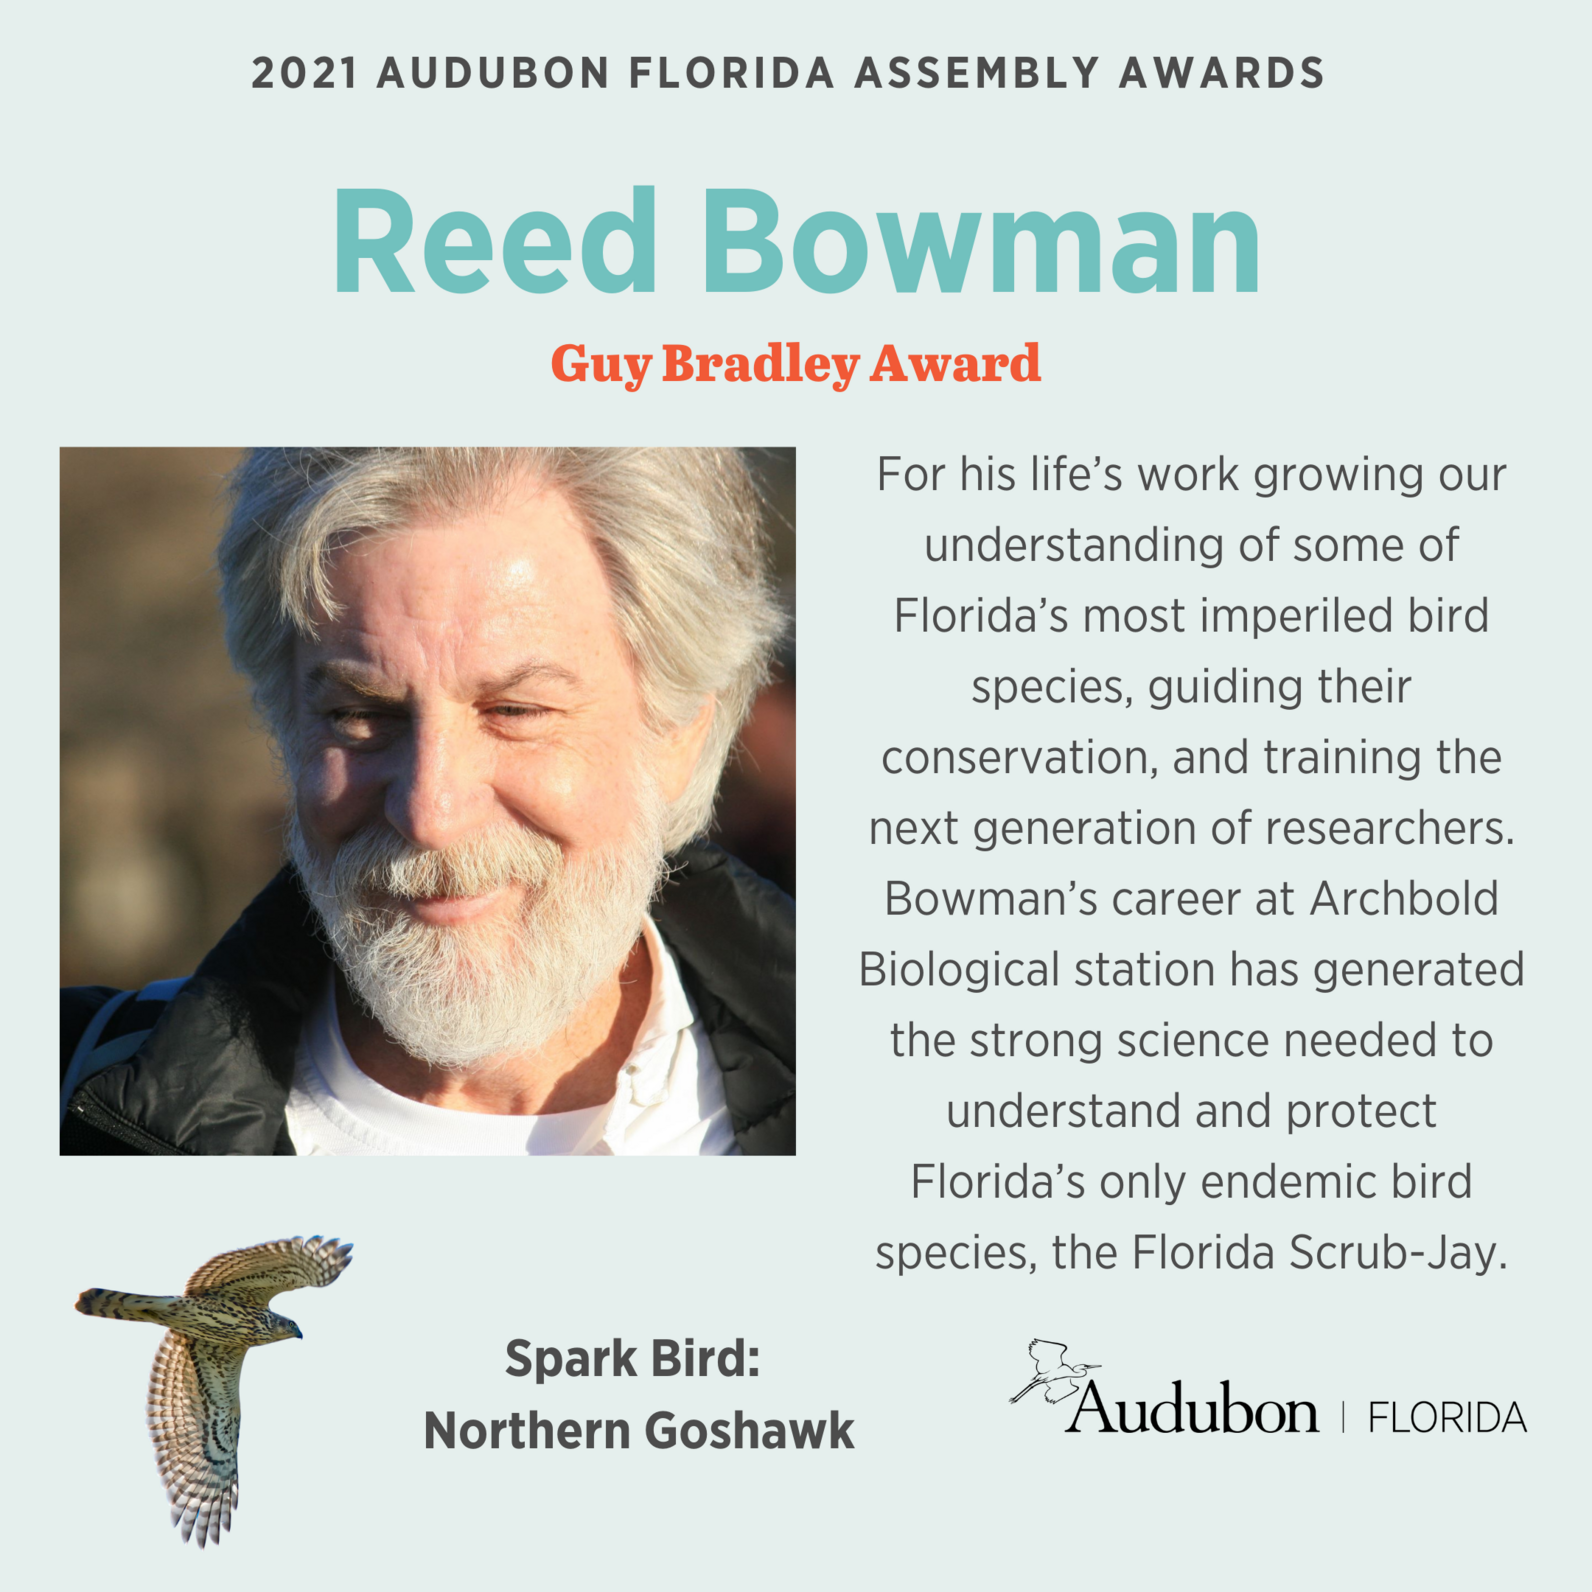 A graphic of Reed Bowman with his headshot, his favorite bird (Northern Goshawk), and repeated language from above about why he won the award.